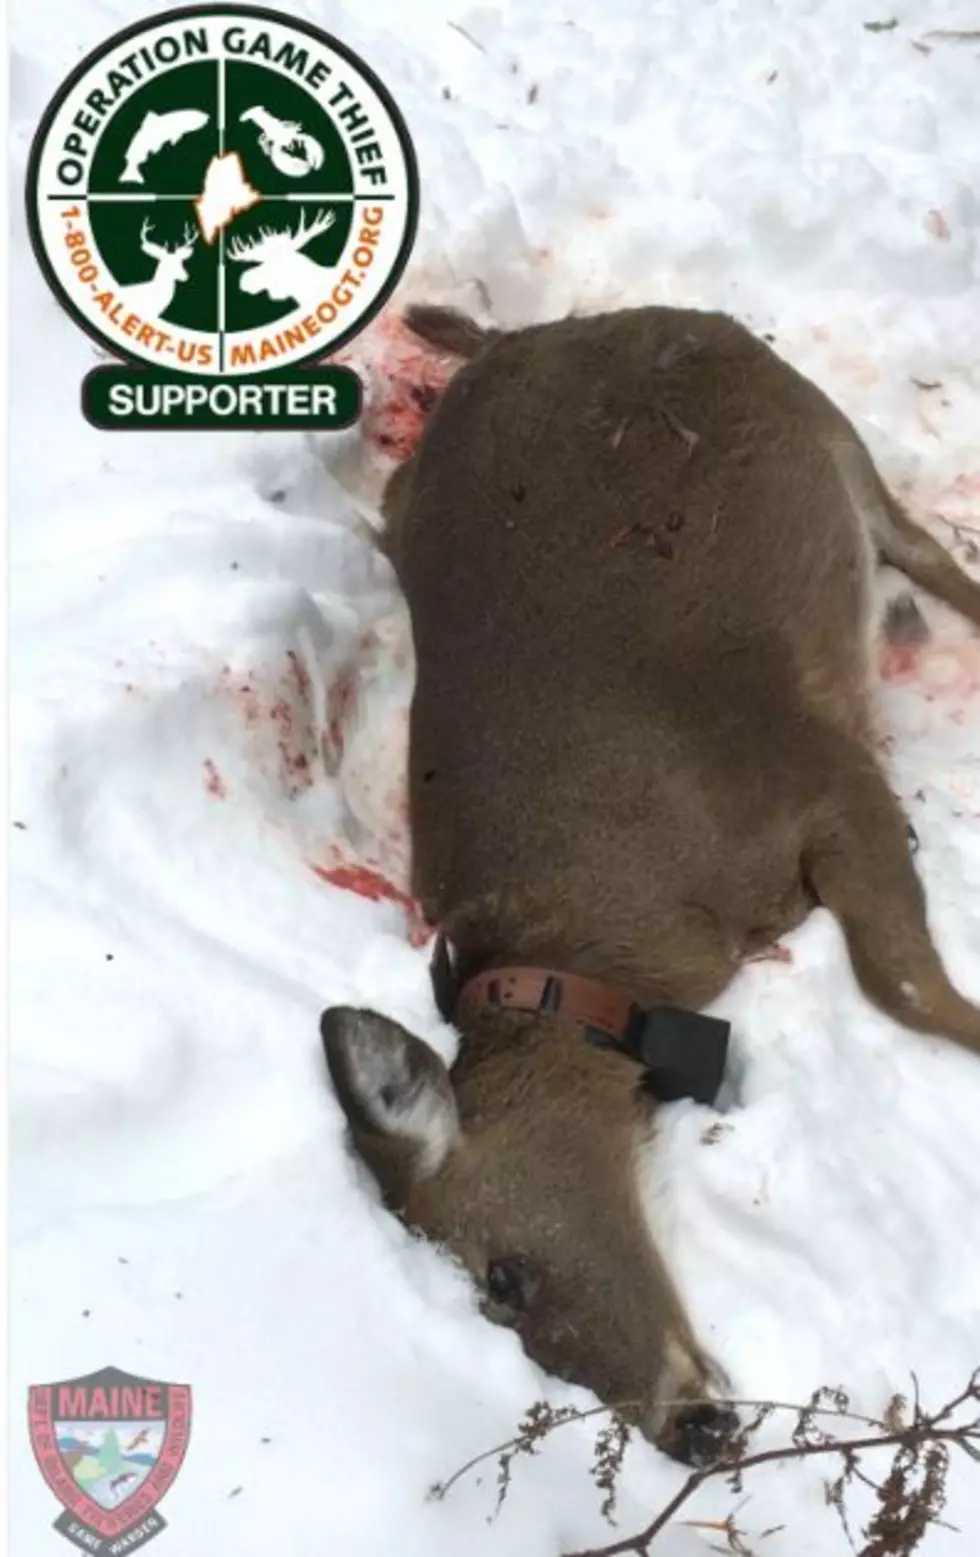 Reward Offered For Information About Person Who Killed a Pregnant Doe